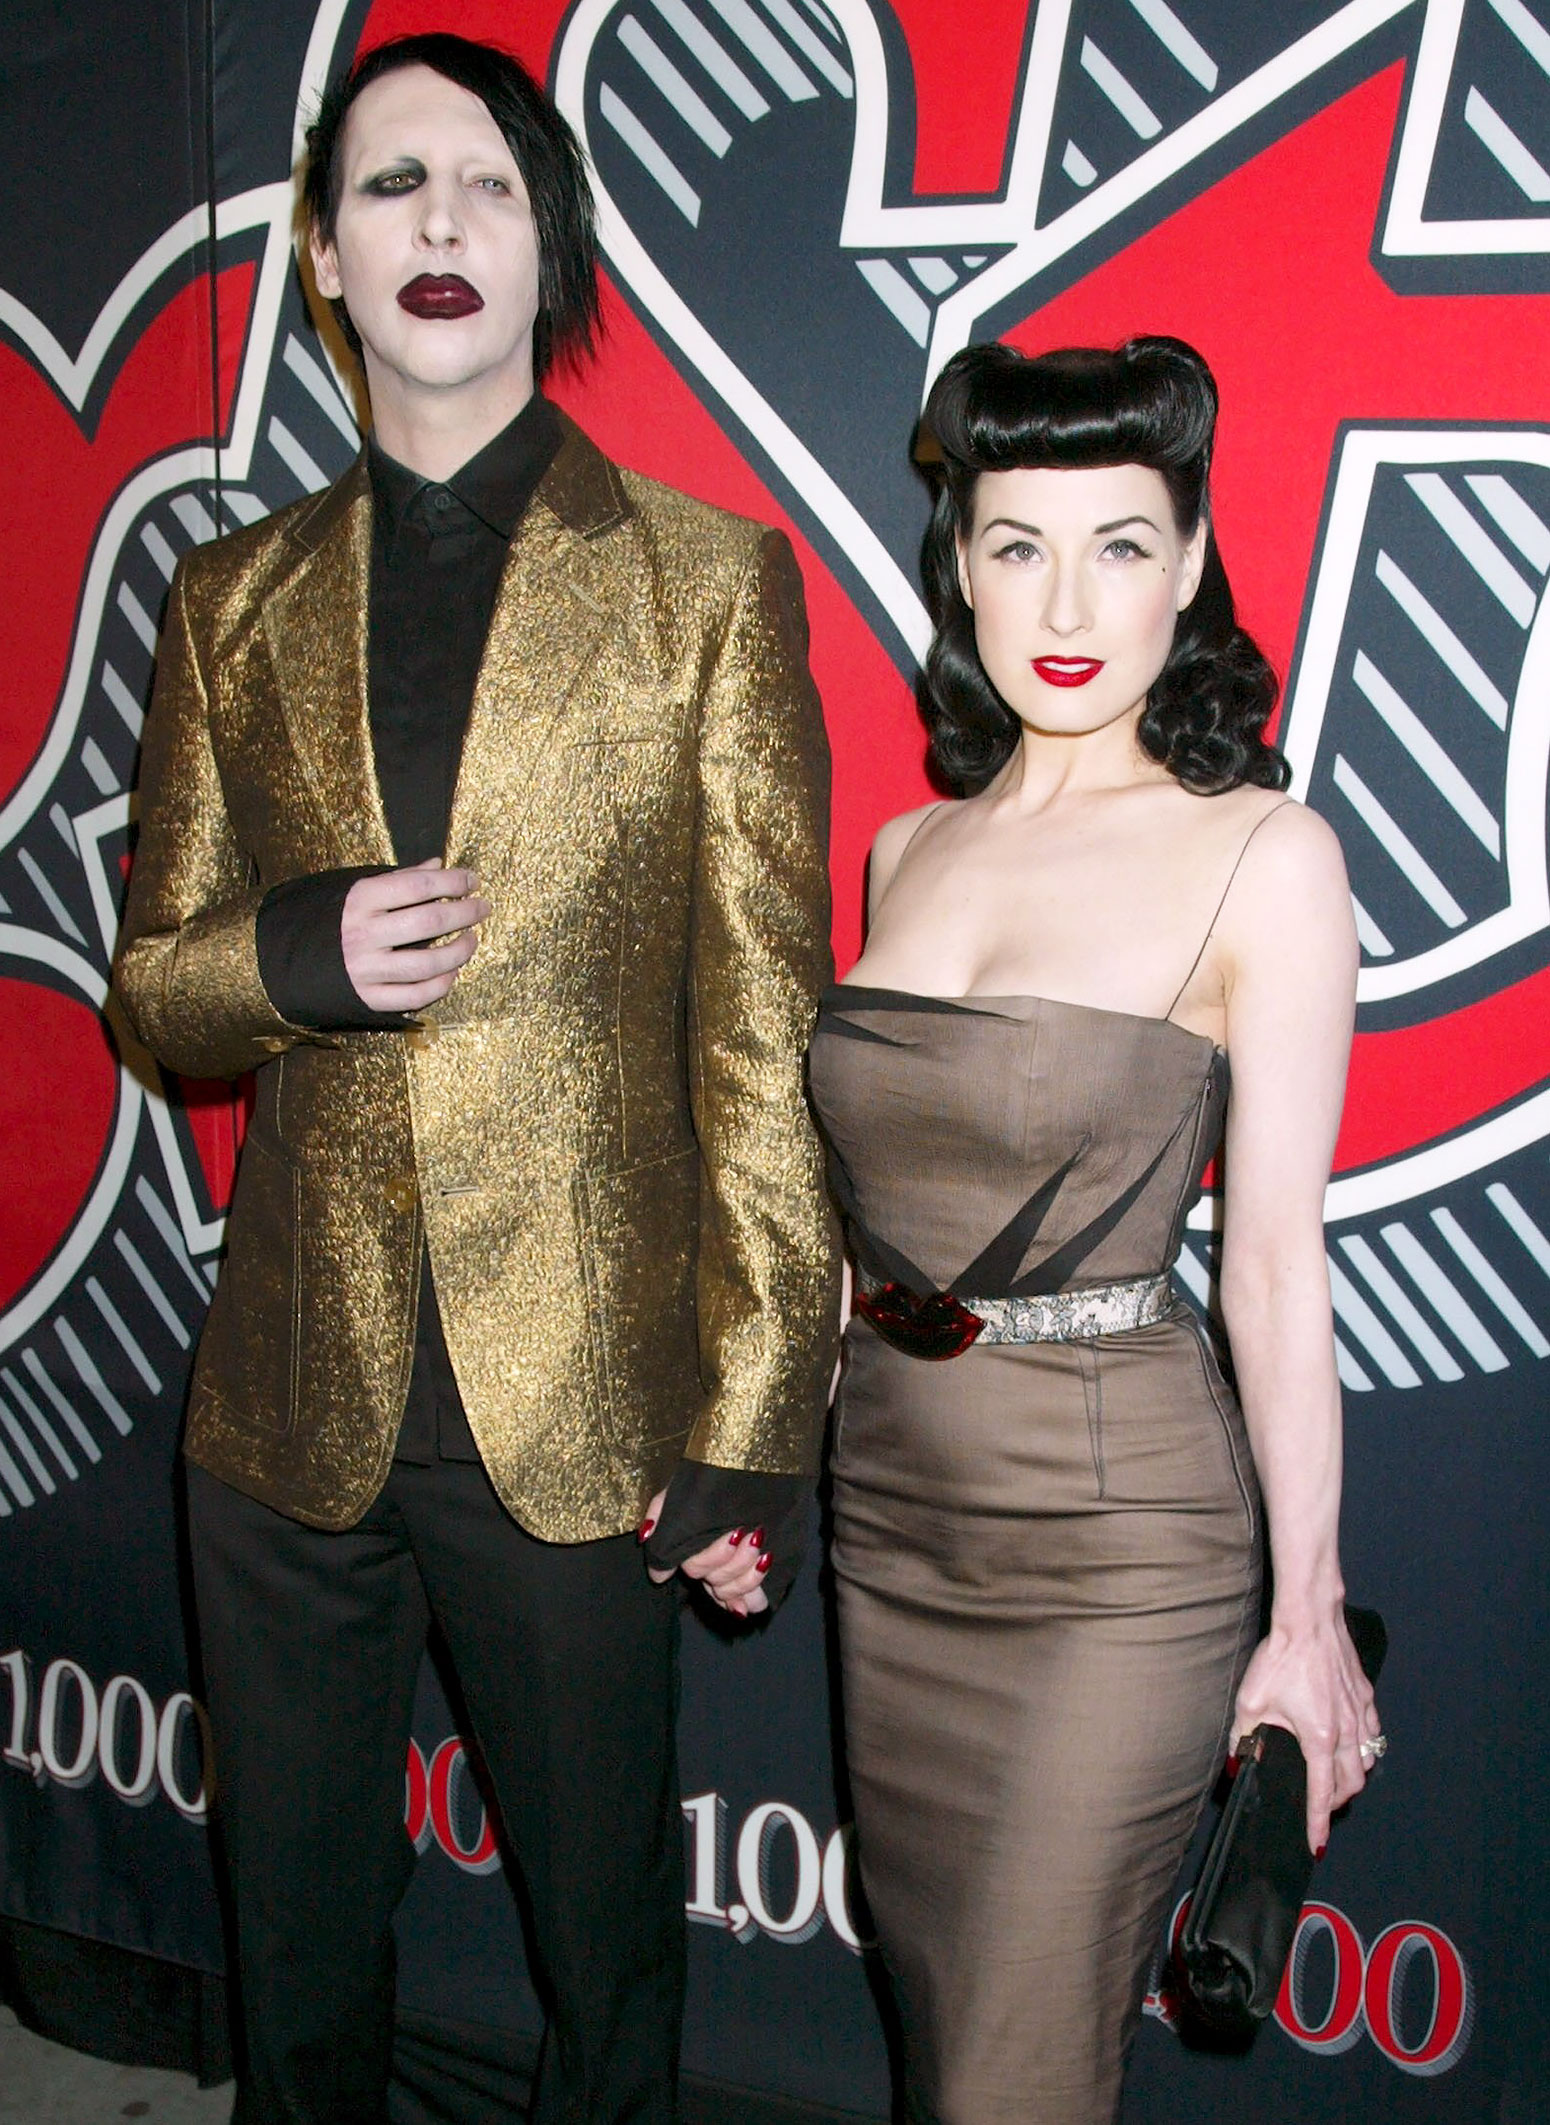 Marilyn Mansons Ex-Wife Dita Von Teese Addresses Abuse Allegations